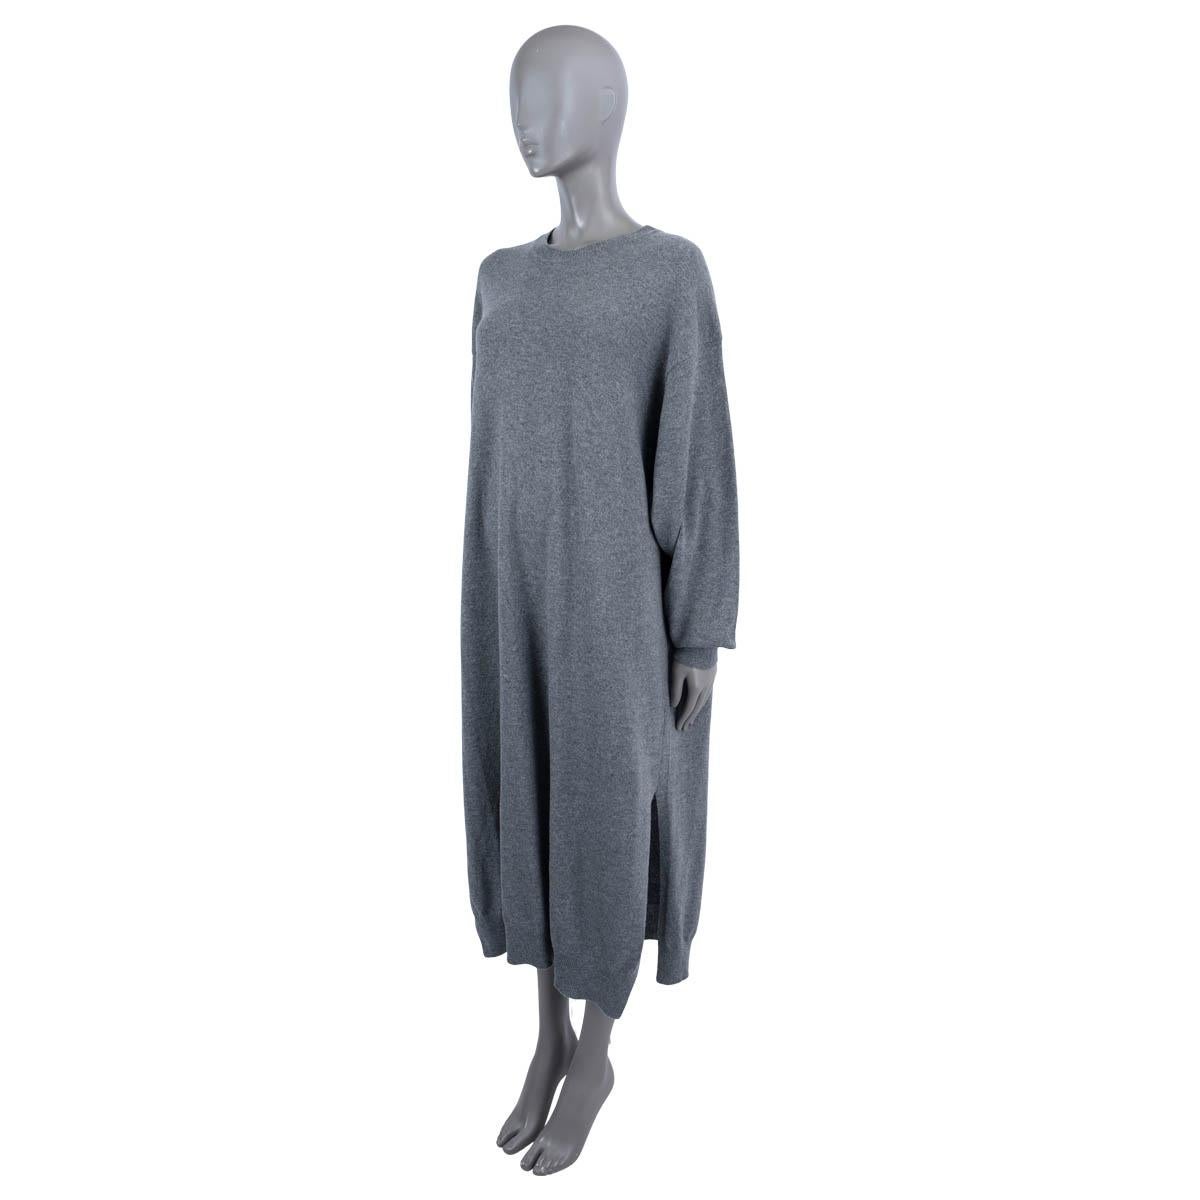 100% authentic The Row knit sweater dress in ultra-soft cashmere (100%). The design features a round neck, long sleeves, two slits on the side and pullover style rib-knit cuffs. Has been worn and is in excellent condition. 

Measurements
Tag